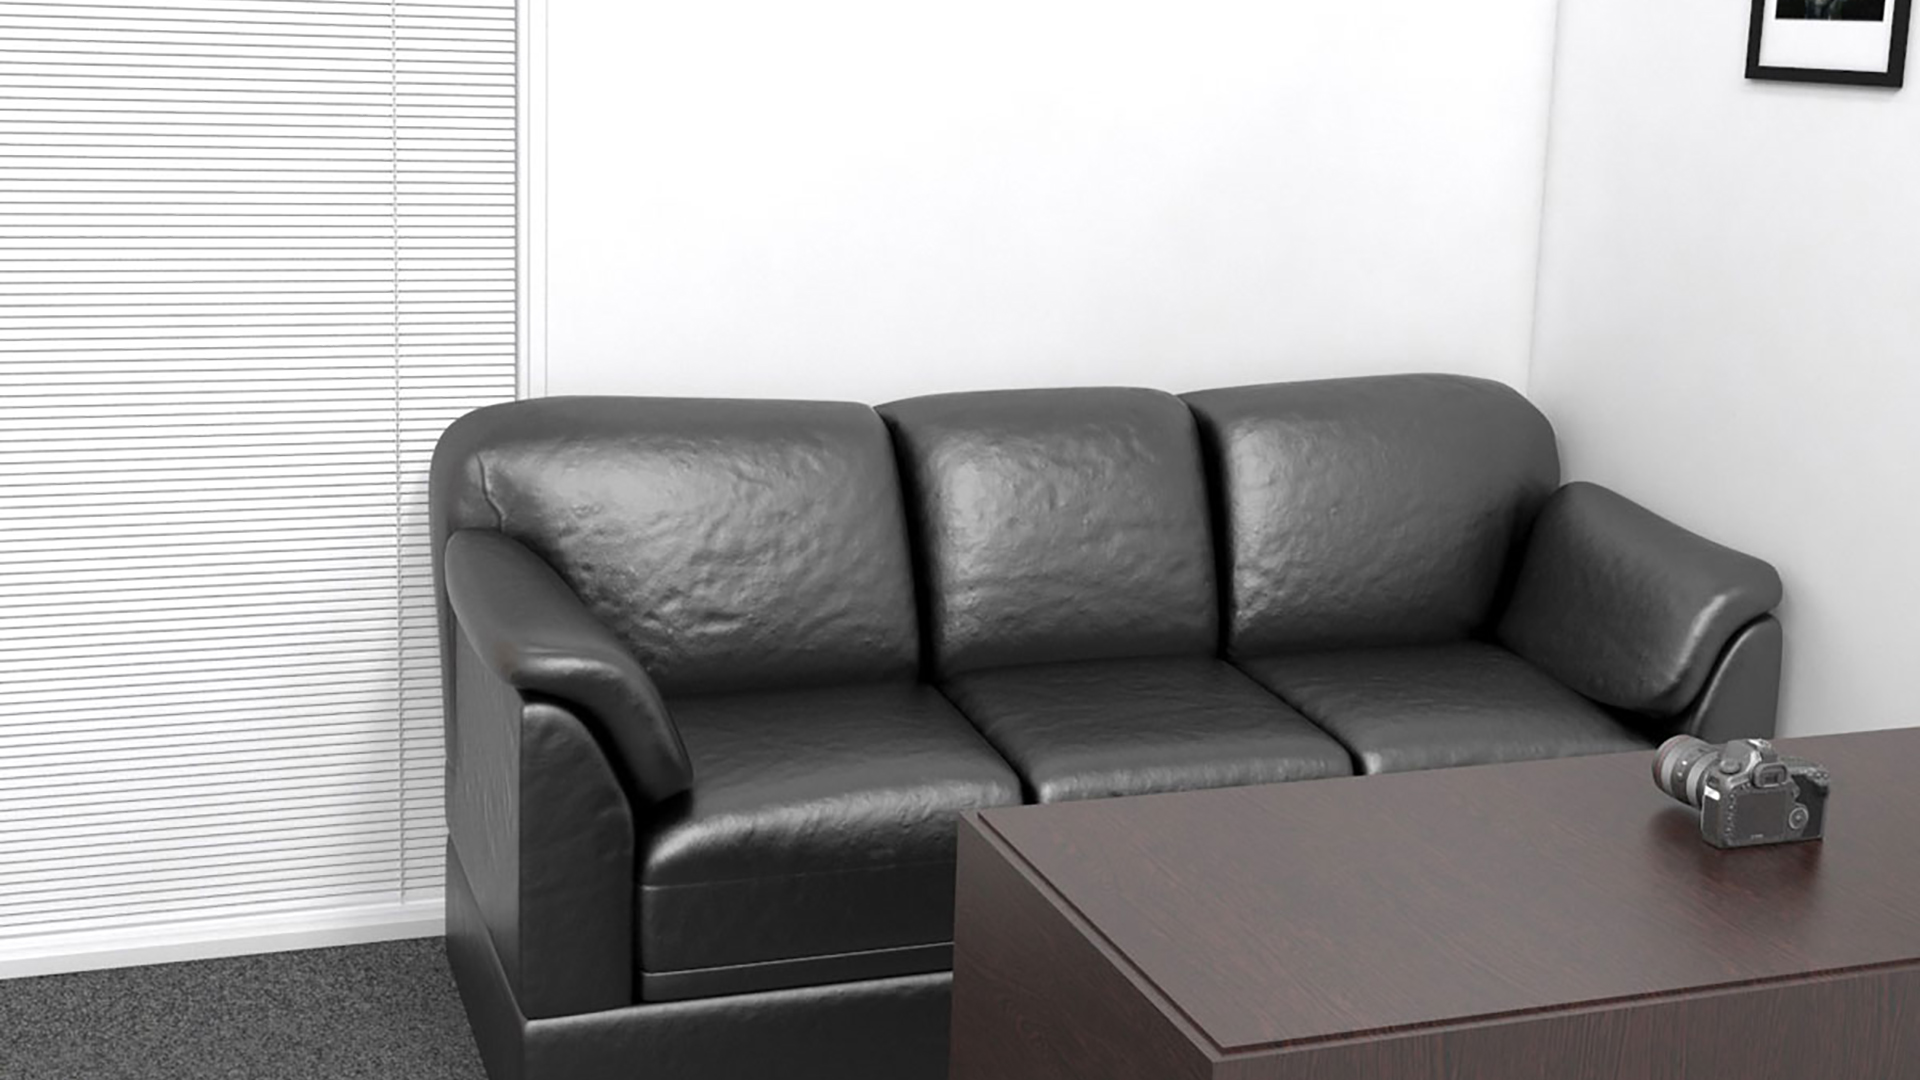 Backroom Casting Couch Home 5